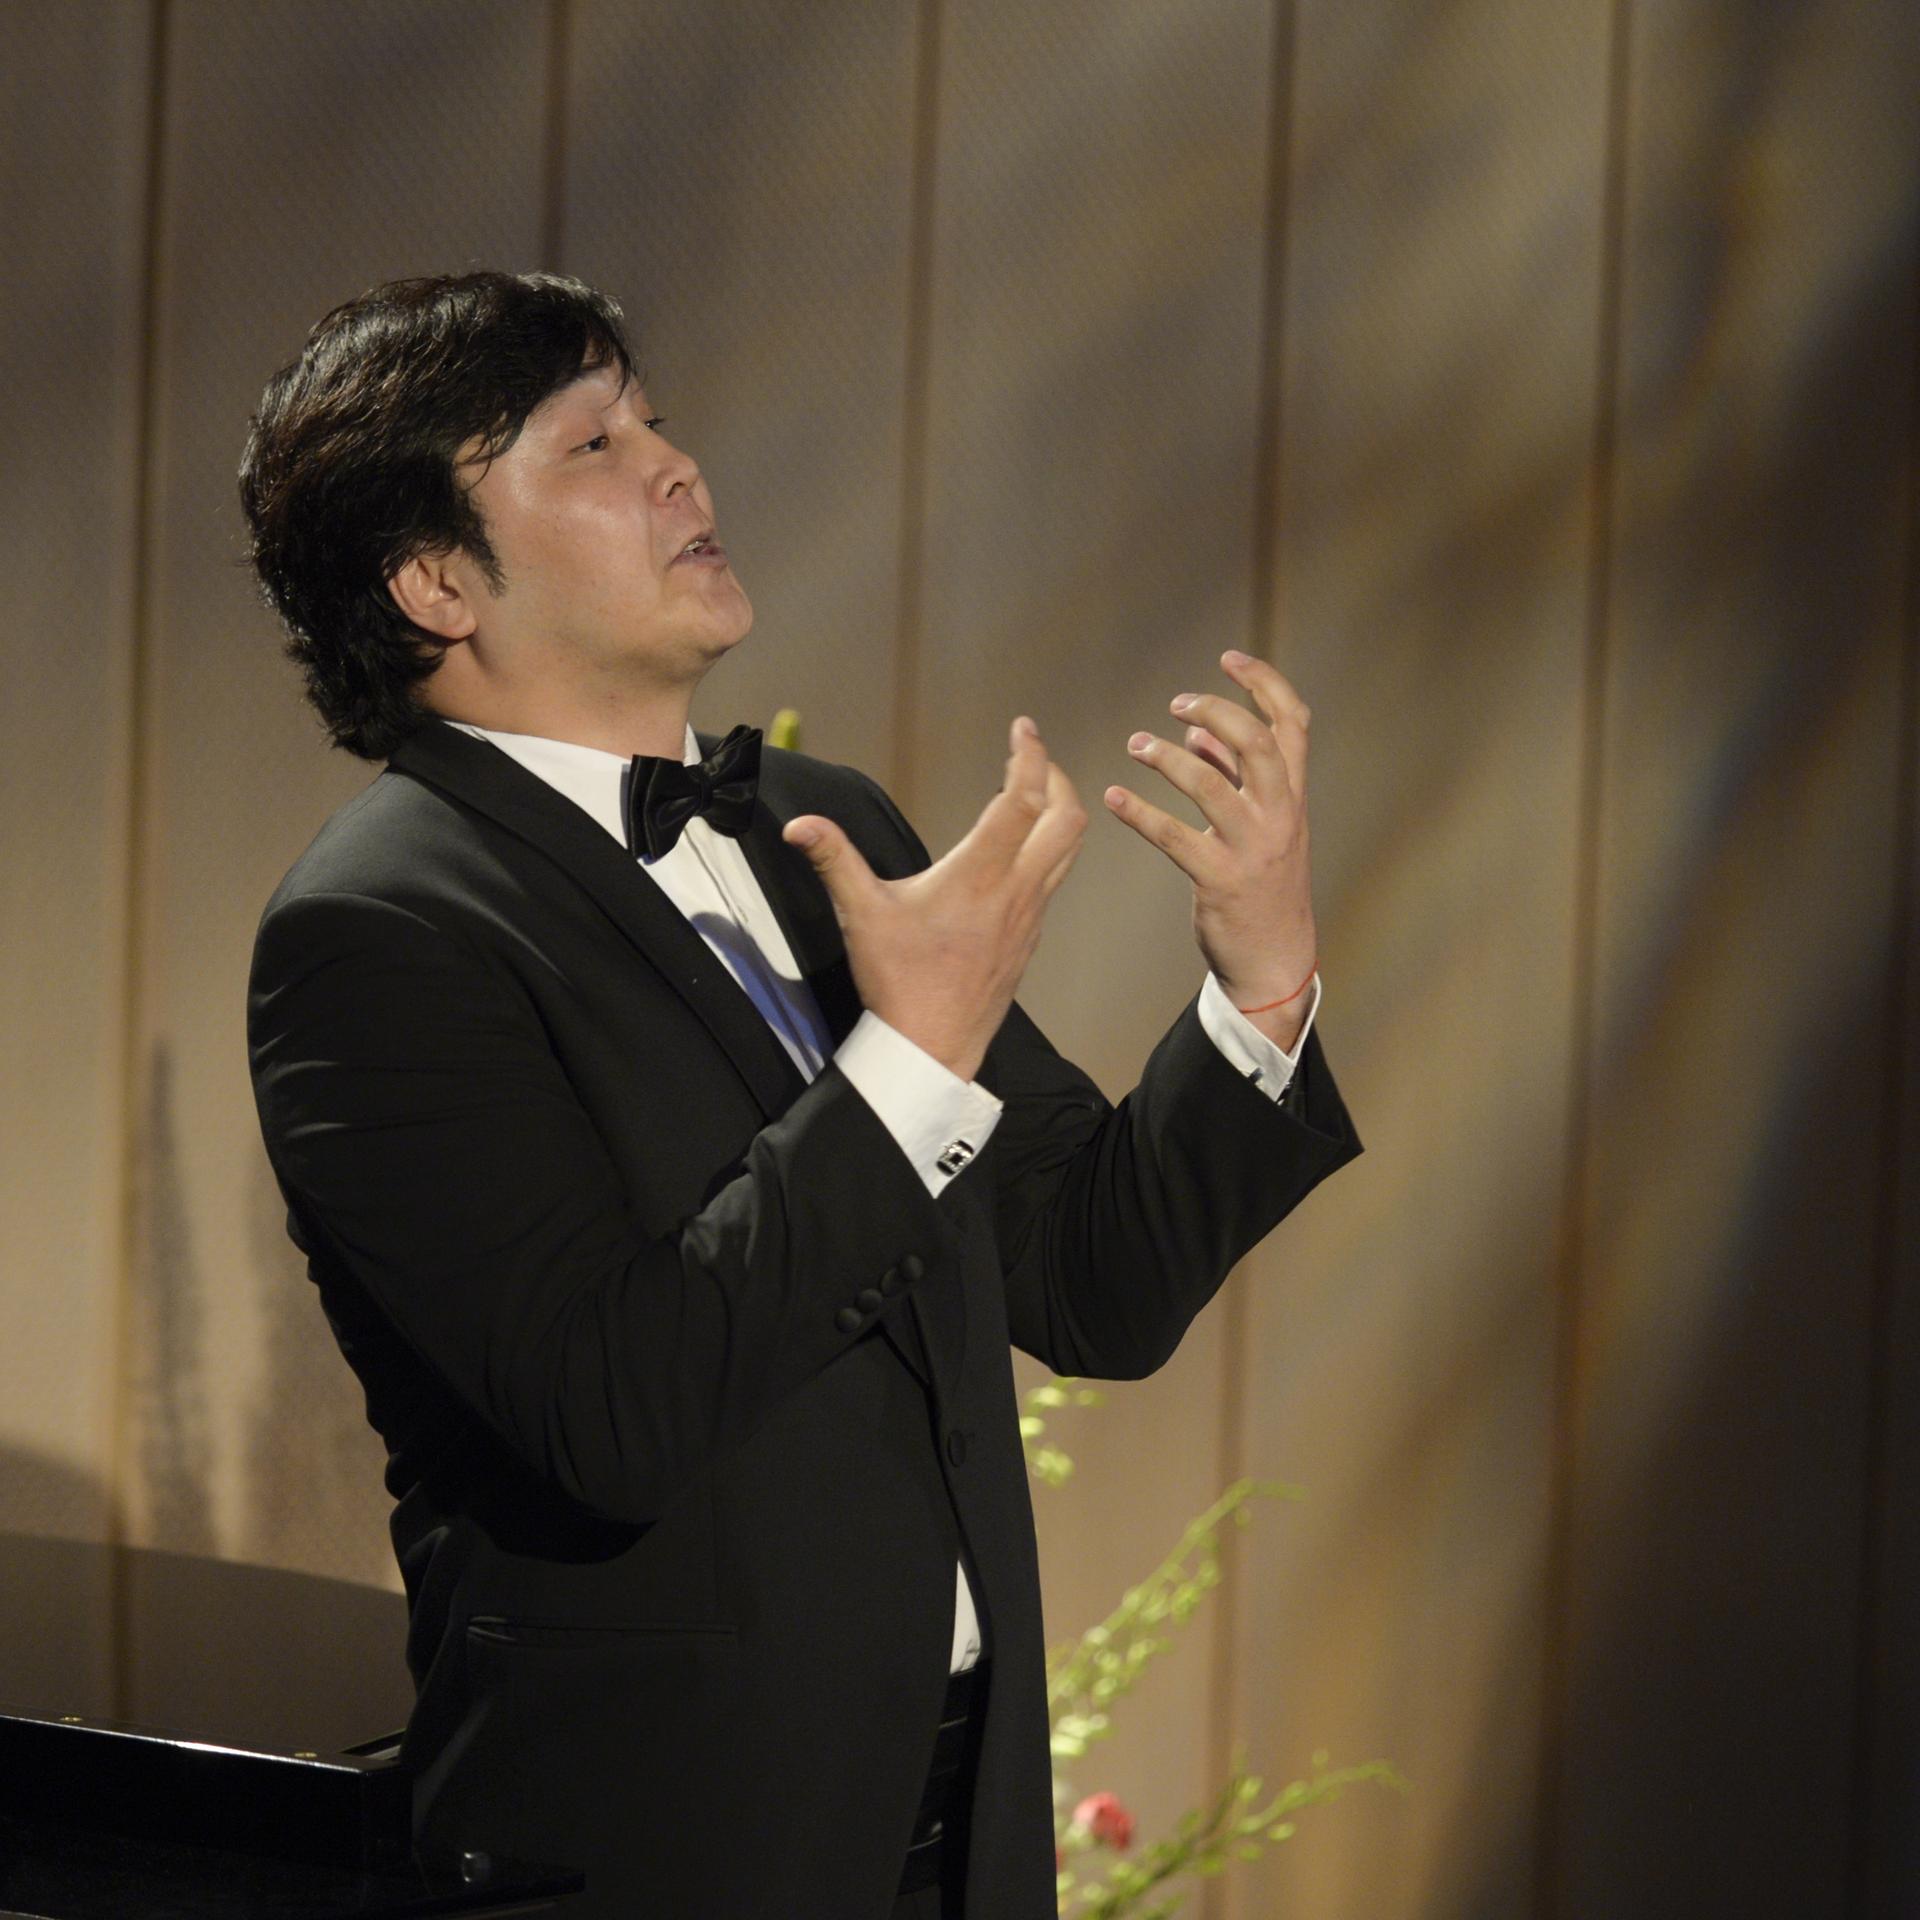 Mongolian baritone Ariunbaatar Ganbaatar won the gold medal in the male opera singers' category at the 15th International Tchaikovsky Competition in Moscow.